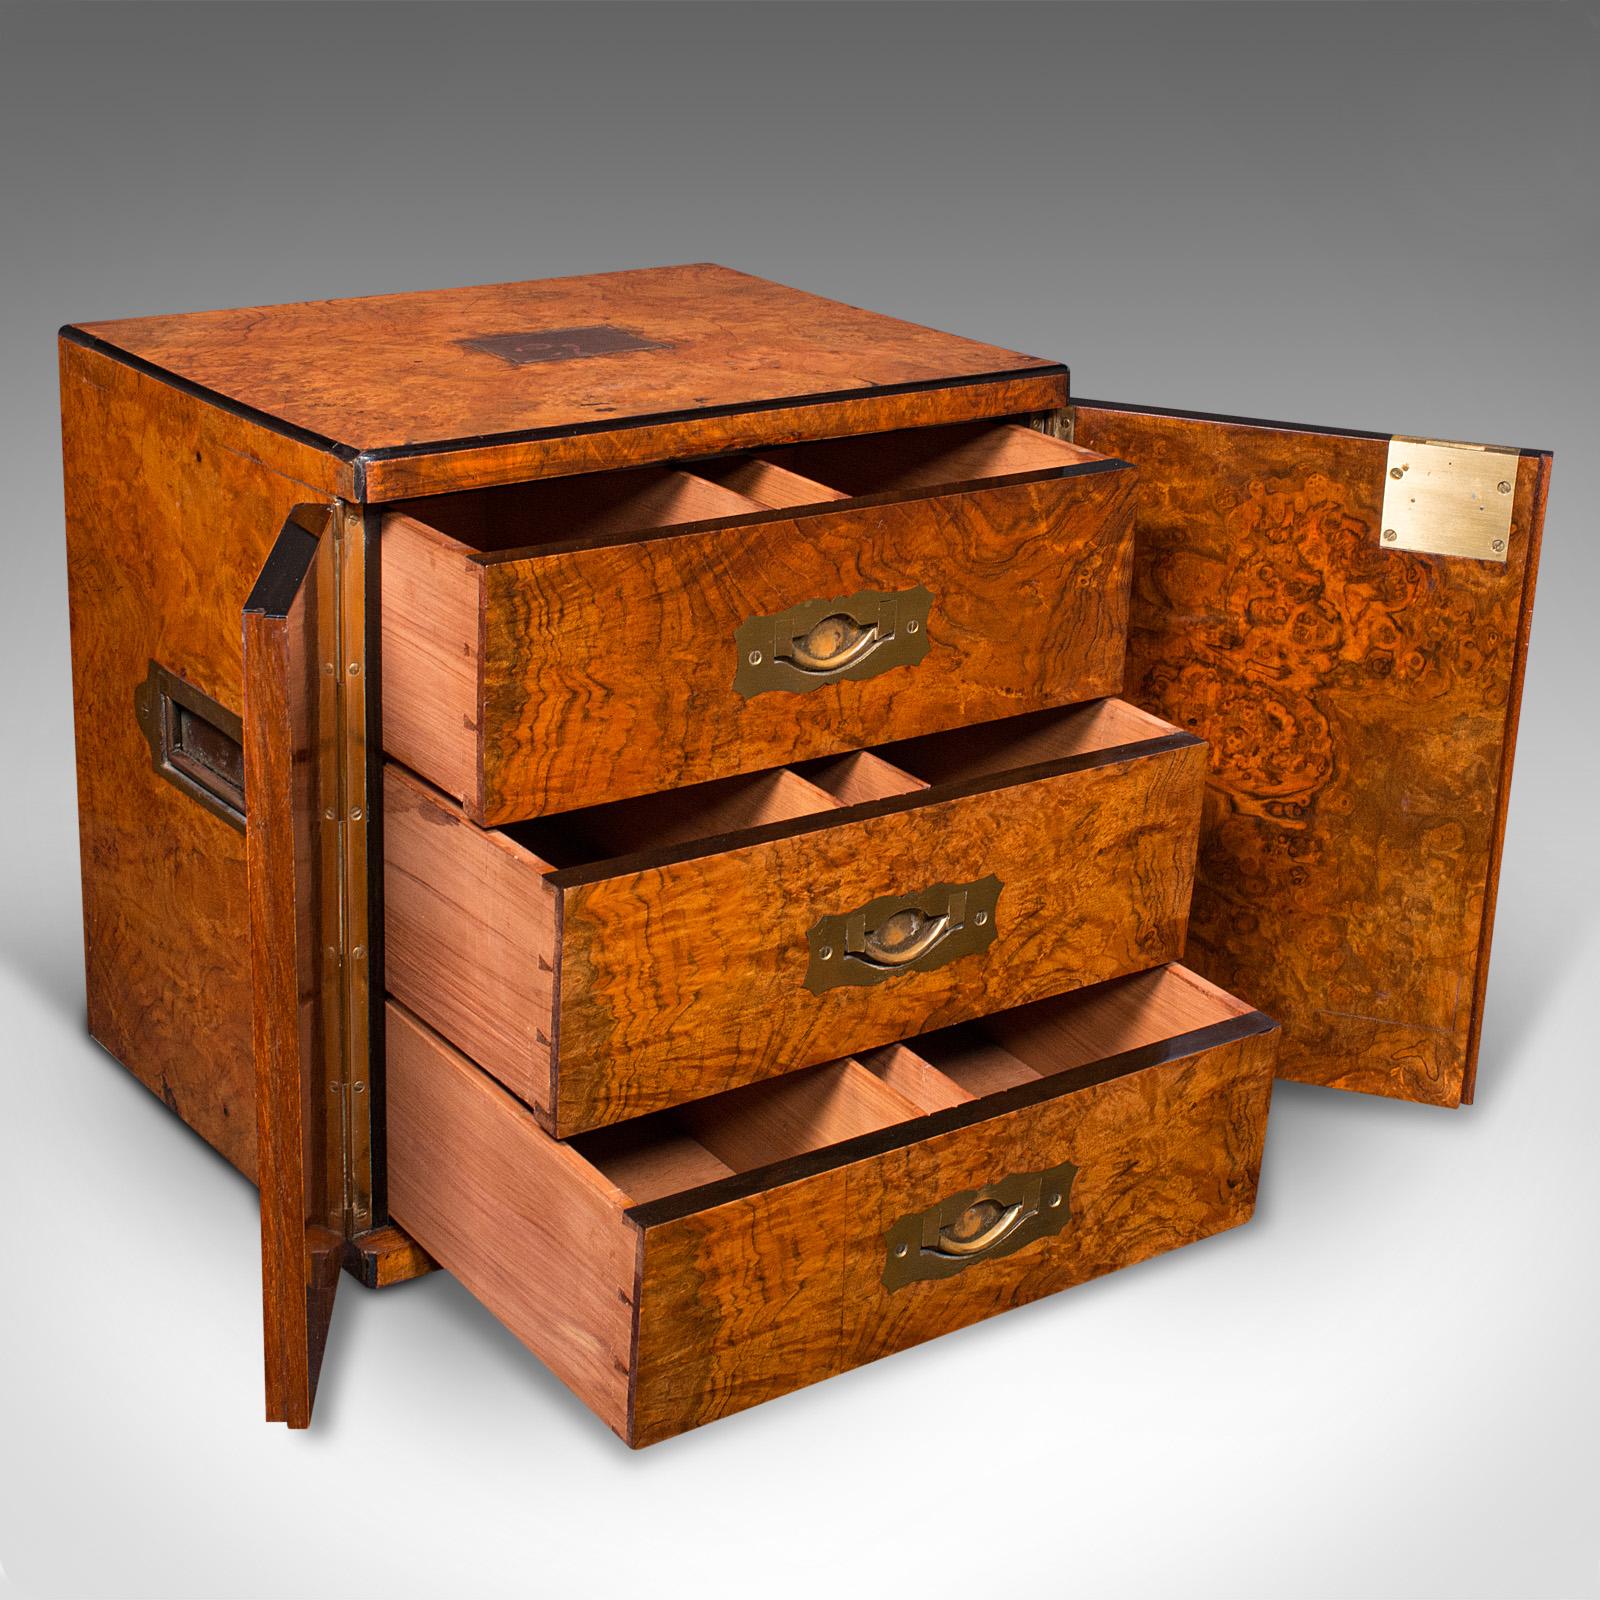 This is an antique gentleman's cigar humidor. An English, burr walnut and cedar campaign smoker's box with Bramah lock, dating to the Regency period, circa 1820.

Exquisite figuring and craftsmanship elevate this fine humidor
Displaying a